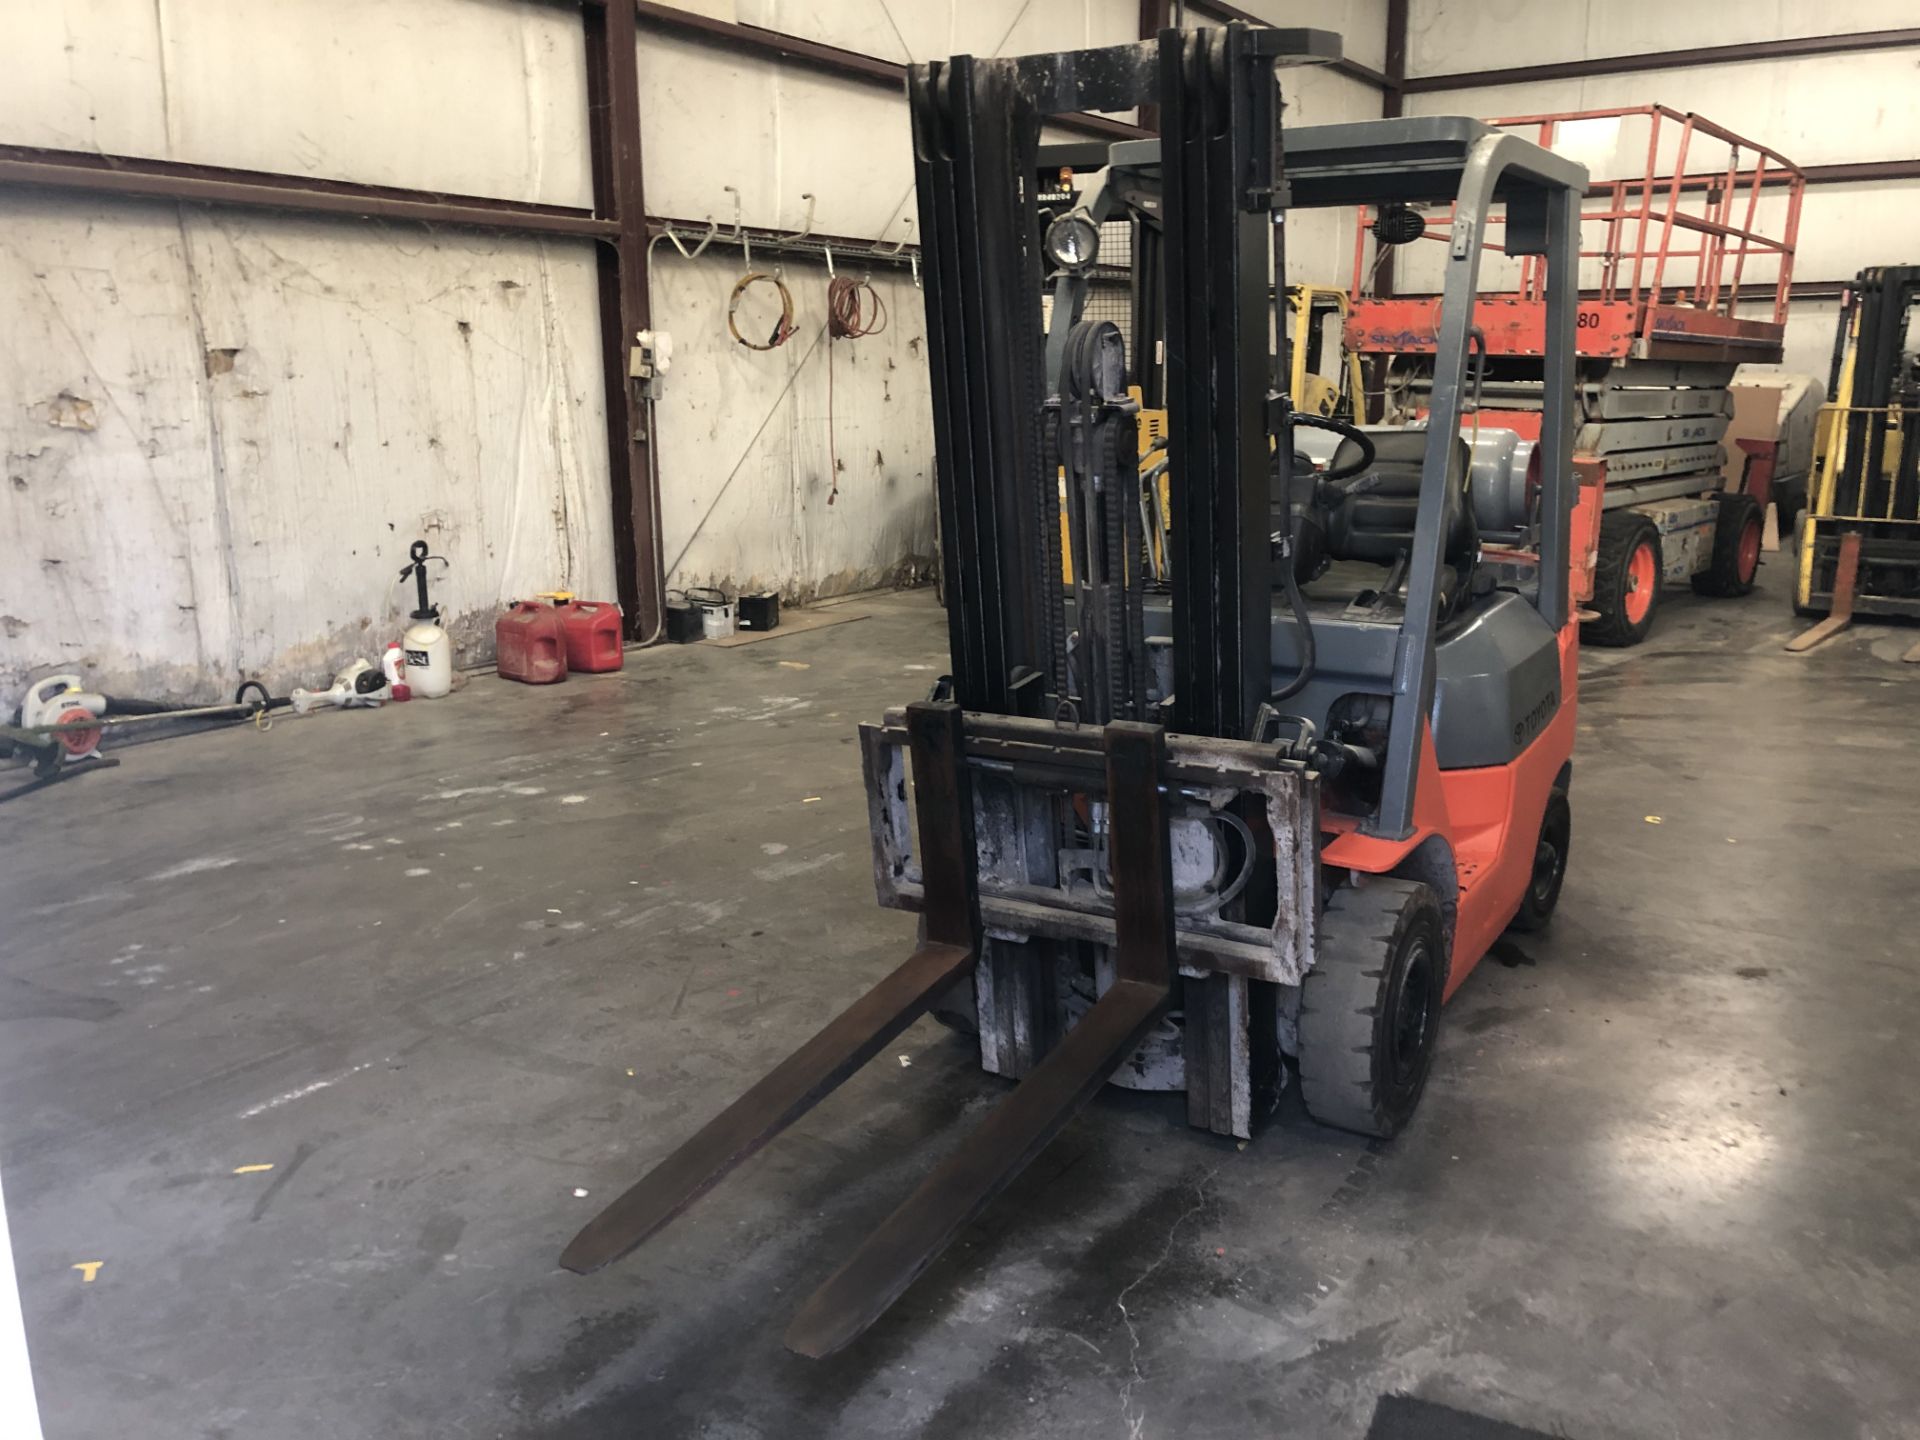 2005 TOYOTA 3,500-LB CAPACITY FORKLIFT, MODEL: 7FGU18, S/N: 65917, LPG *FORKS WON'T MOVE UP OR DOWN* - Image 4 of 5